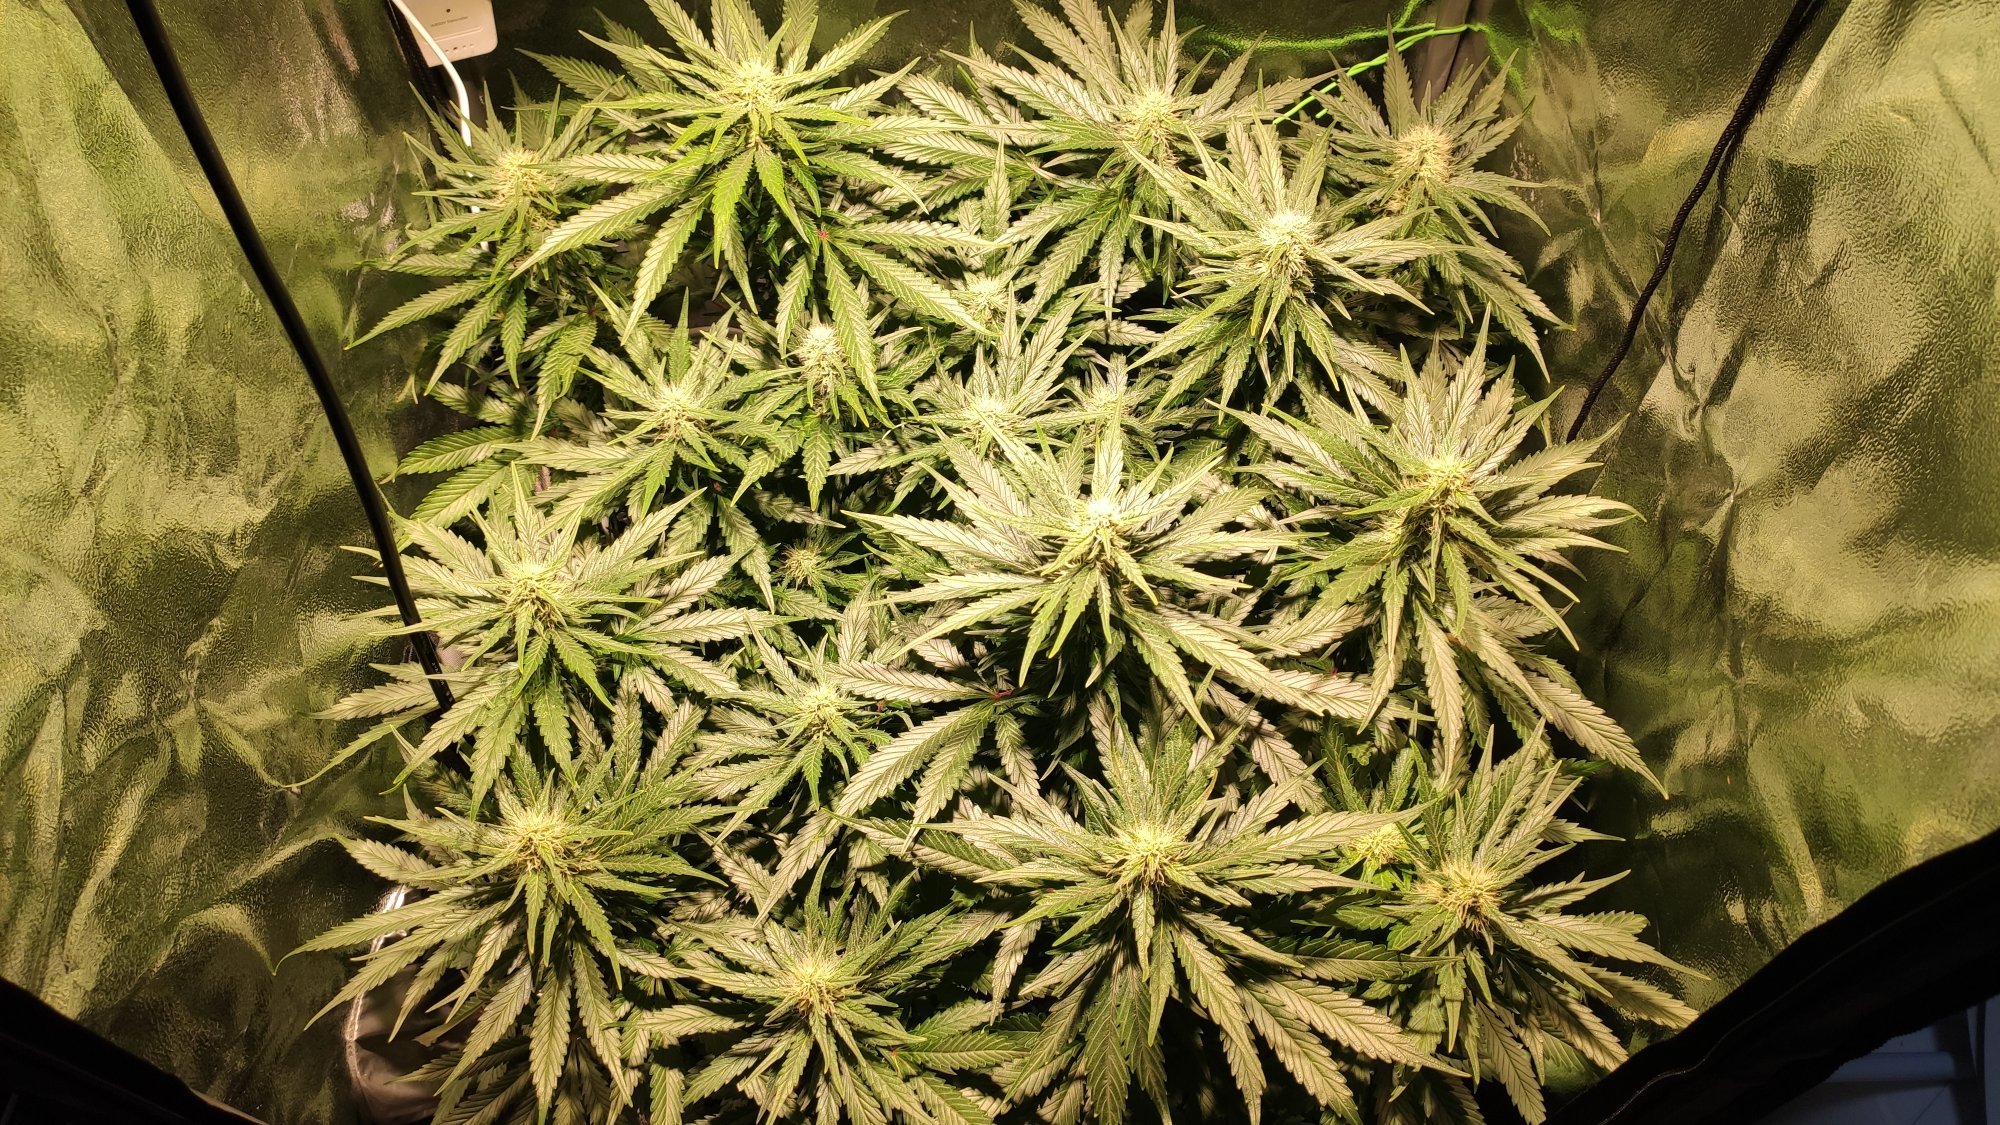 Preventing n toxicity in flower